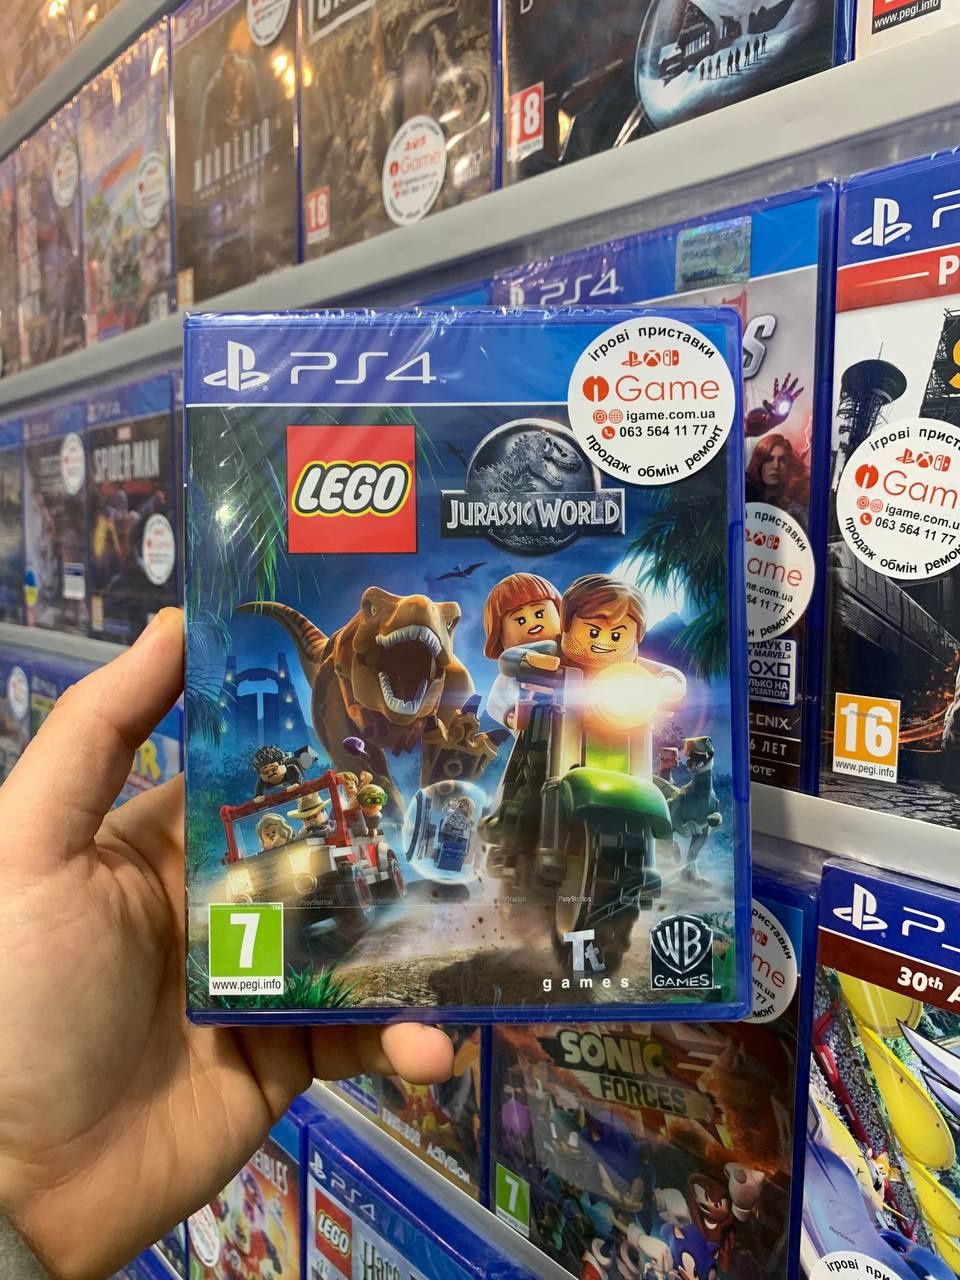 Lego Jurassic World, Ps4, Ps5, Sony Playstation, igame